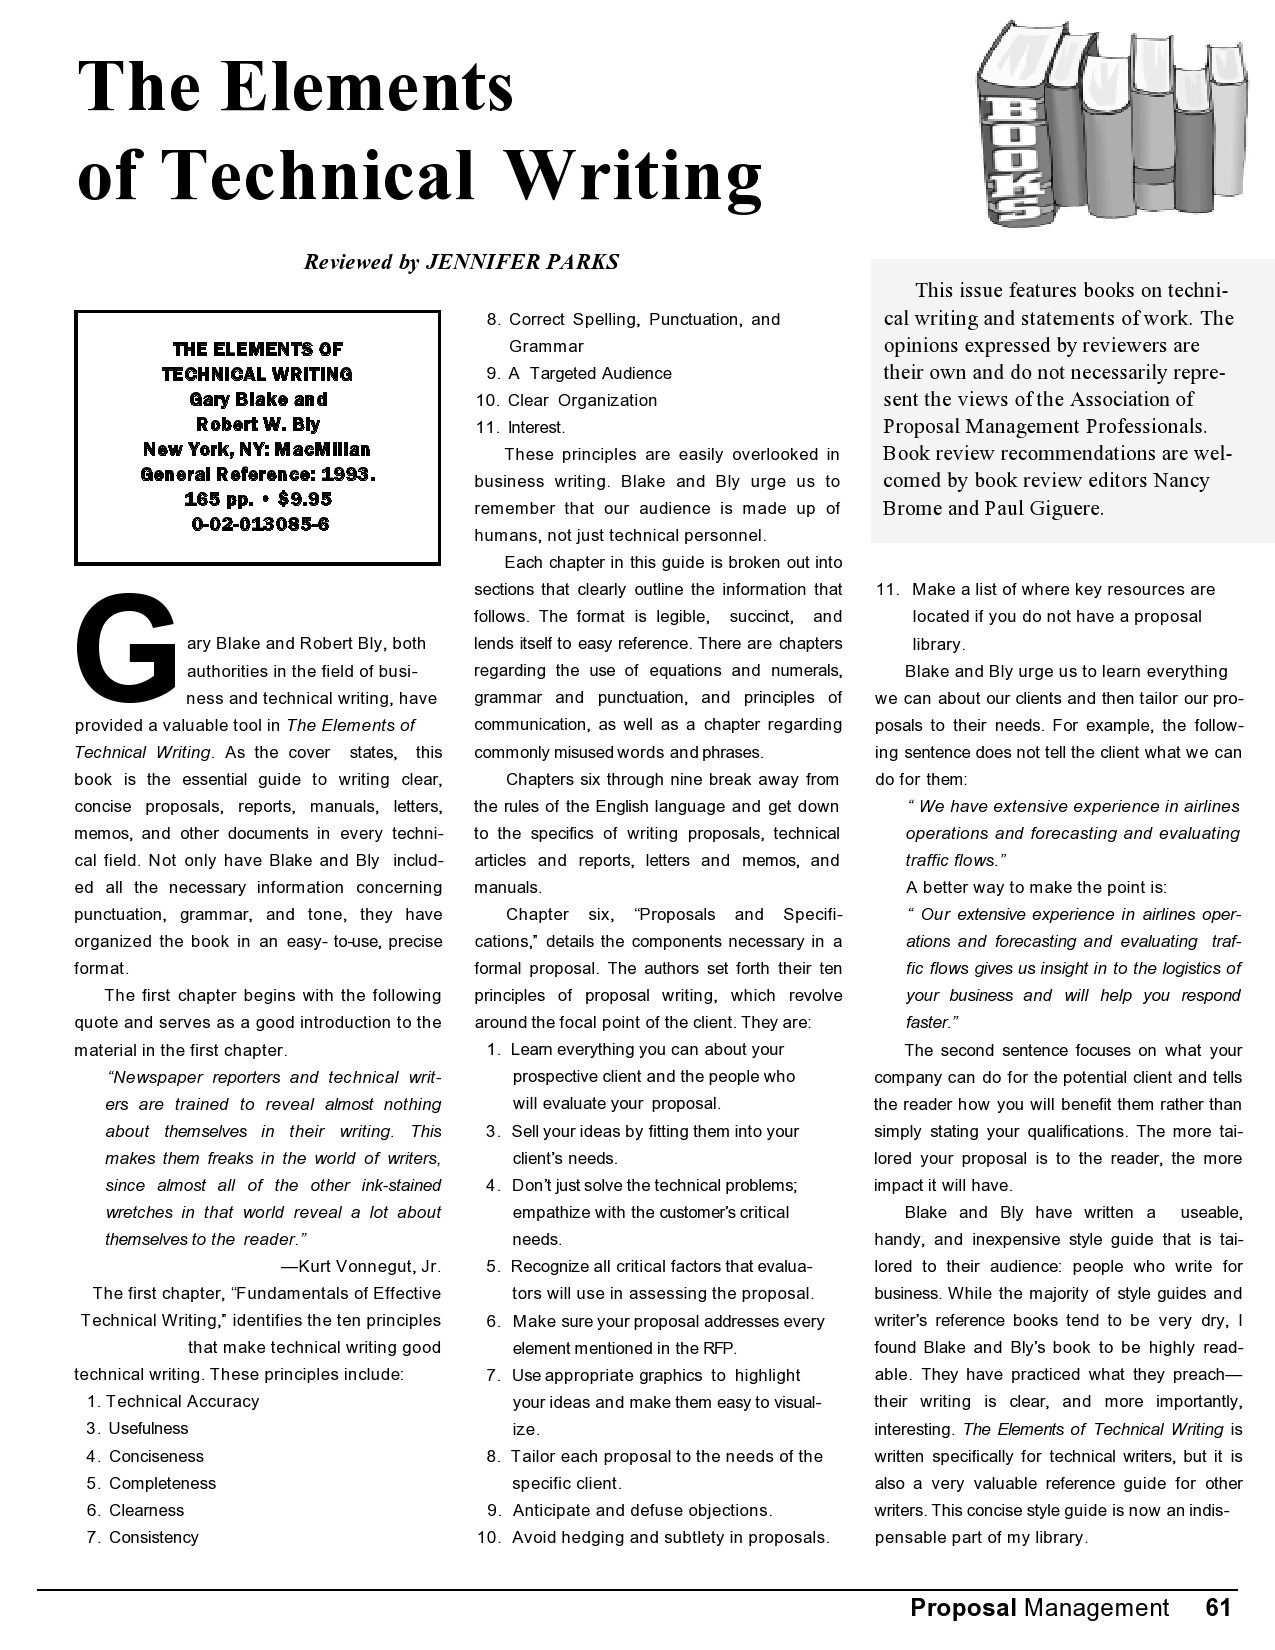 articles on technical writing